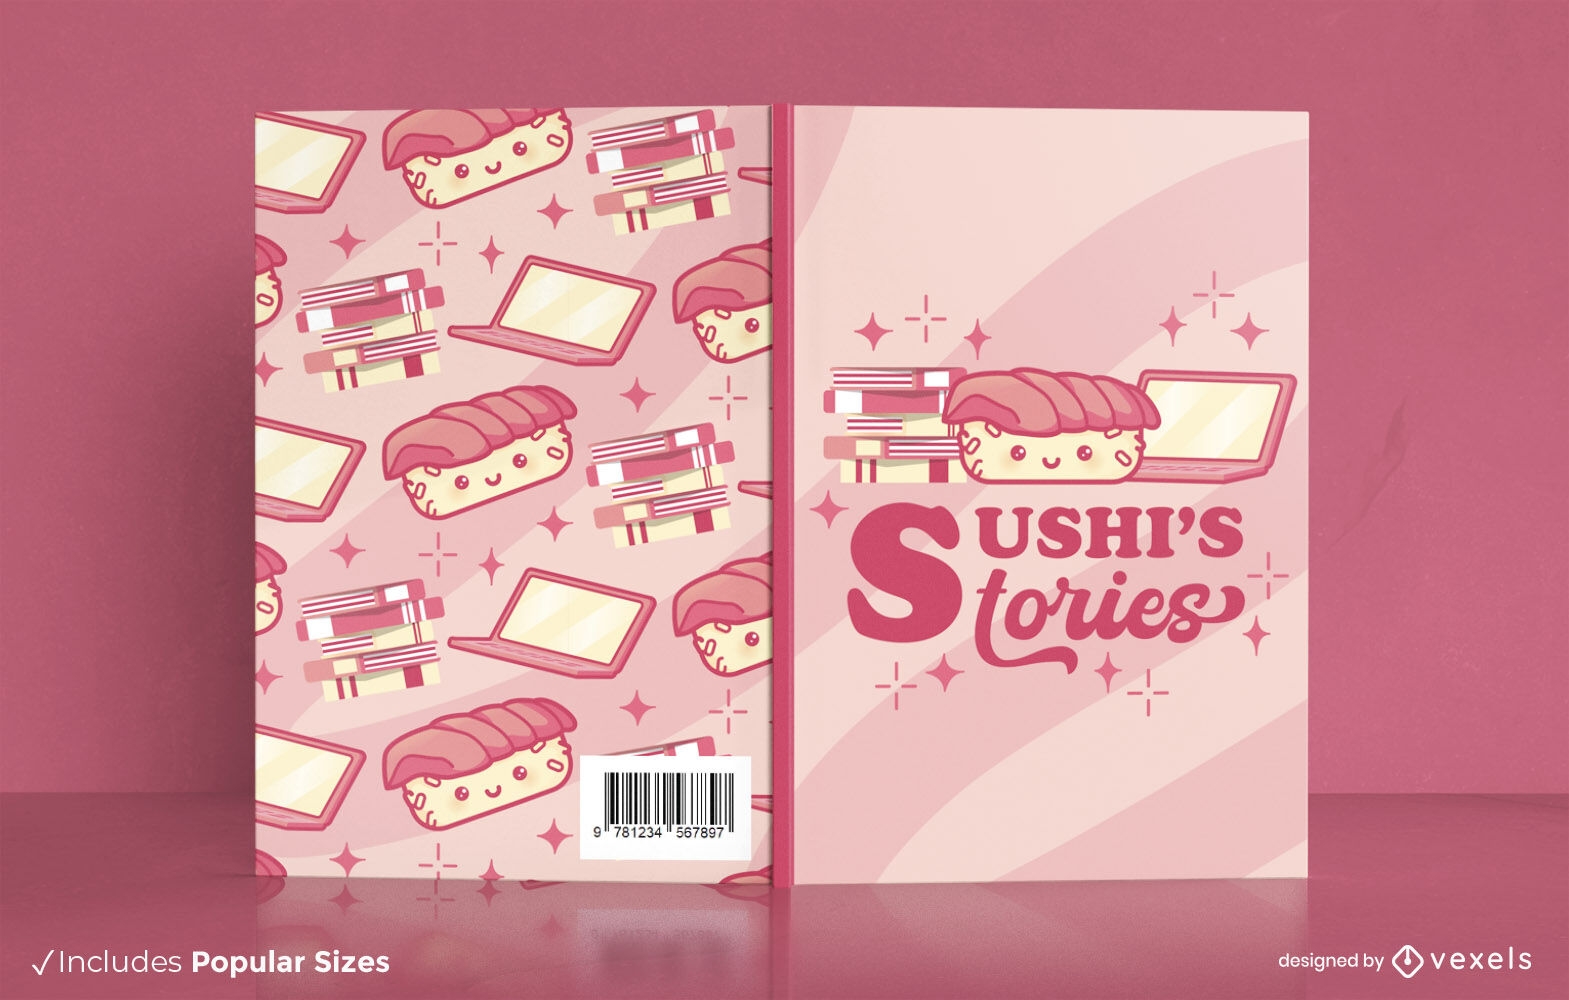 Sushi stories book cover design